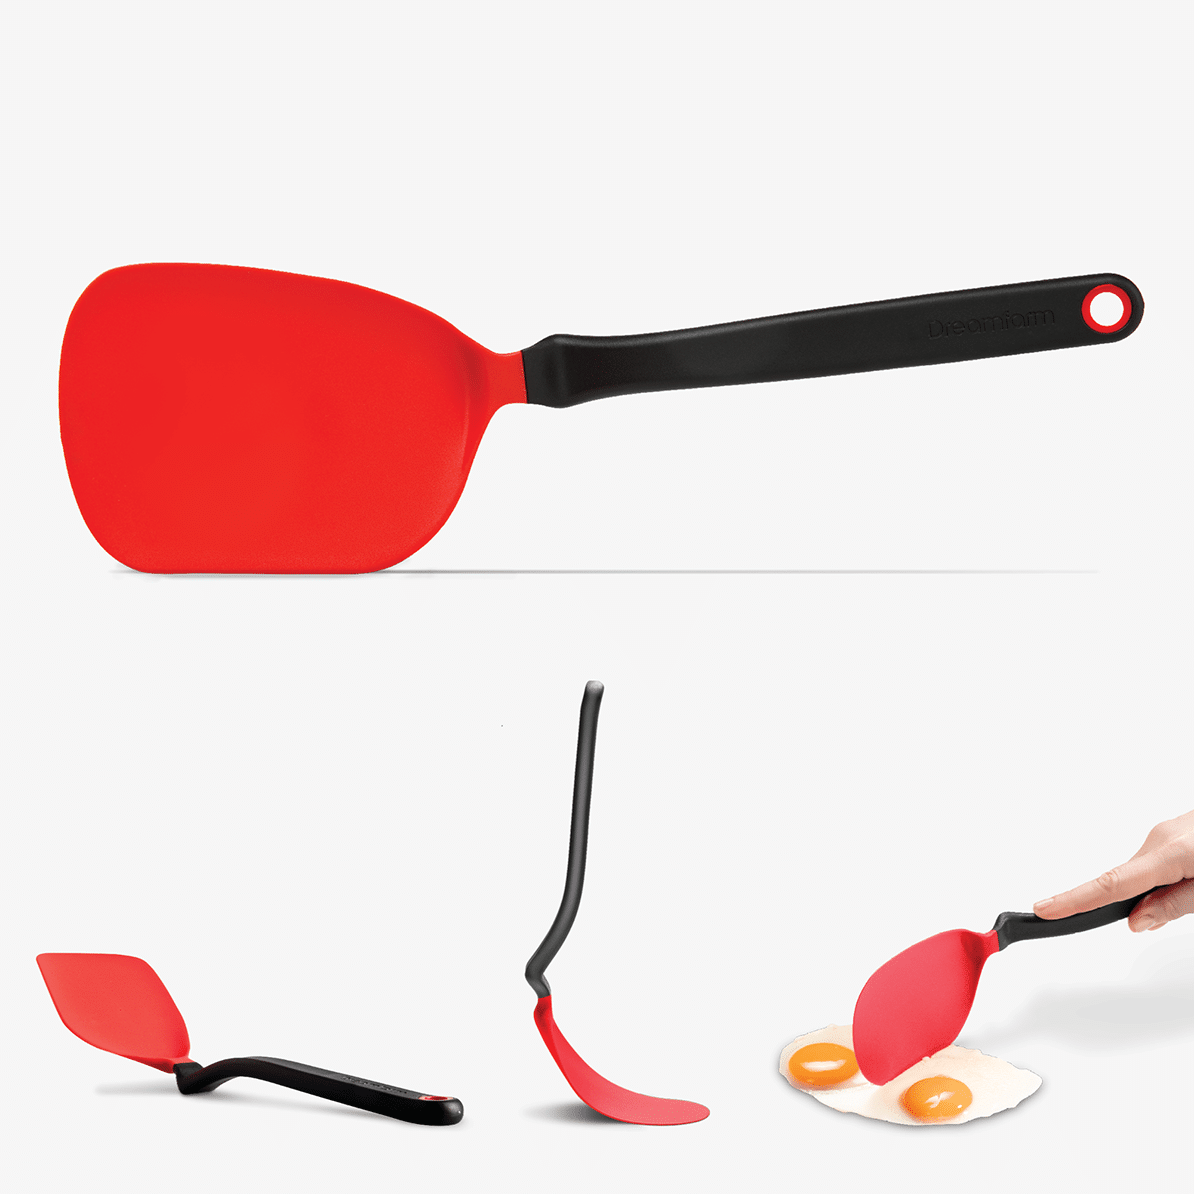 The Chopula is an award-winning spatula that is not only thin and flexible for flipping from the front, but also incredibly strong for chopping on its side. Great for separating minced meat or eggs in a pan, flipping pancakes and serving. Chopula’s clever handle design also lifts its head up off your kitchen bench when you put it down, leaving you a mess-free countertop!